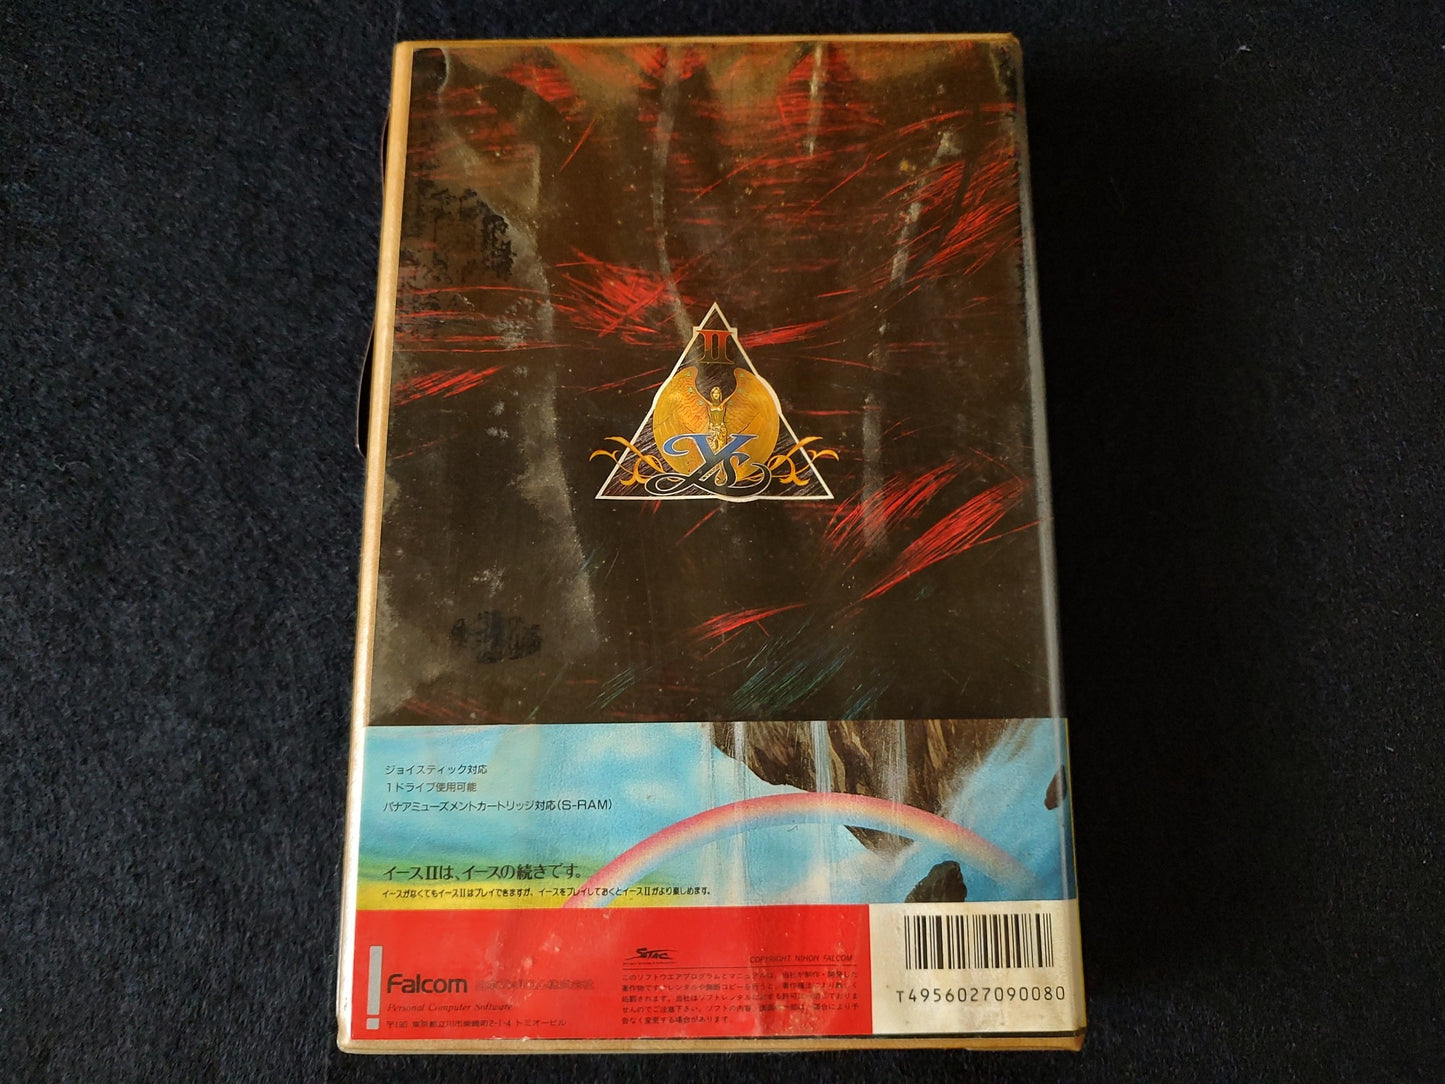 Ys 2 - Ancient Ys Vanished The Final Chapter -MSX2 Game Disk, Manual, Box-f0719-